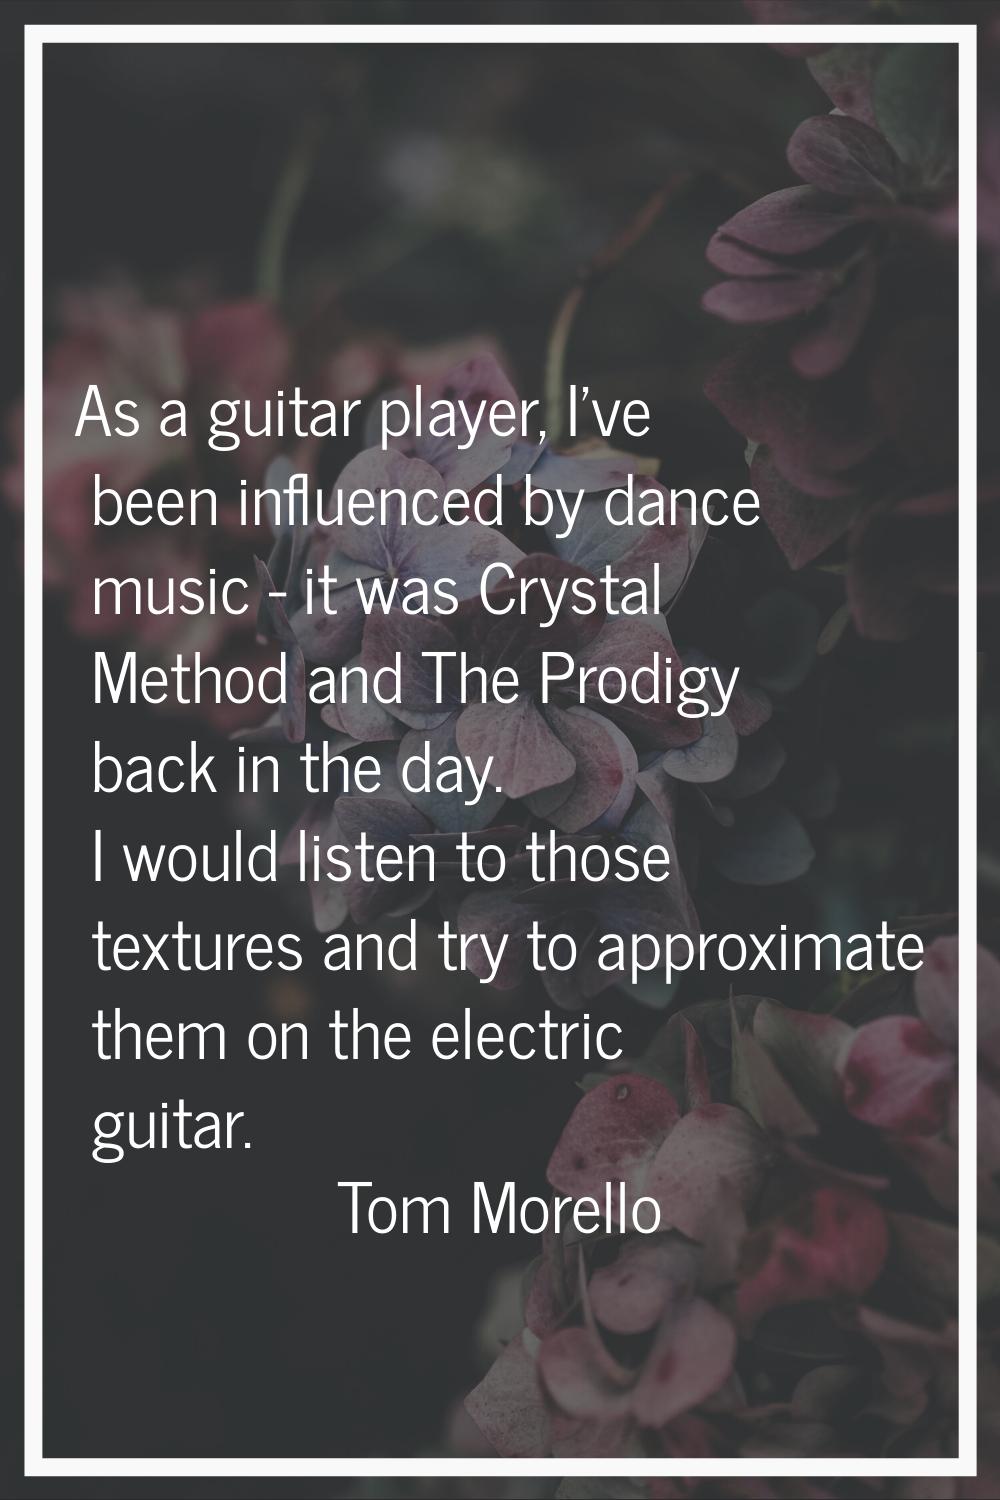 As a guitar player, I've been influenced by dance music - it was Crystal Method and The Prodigy bac